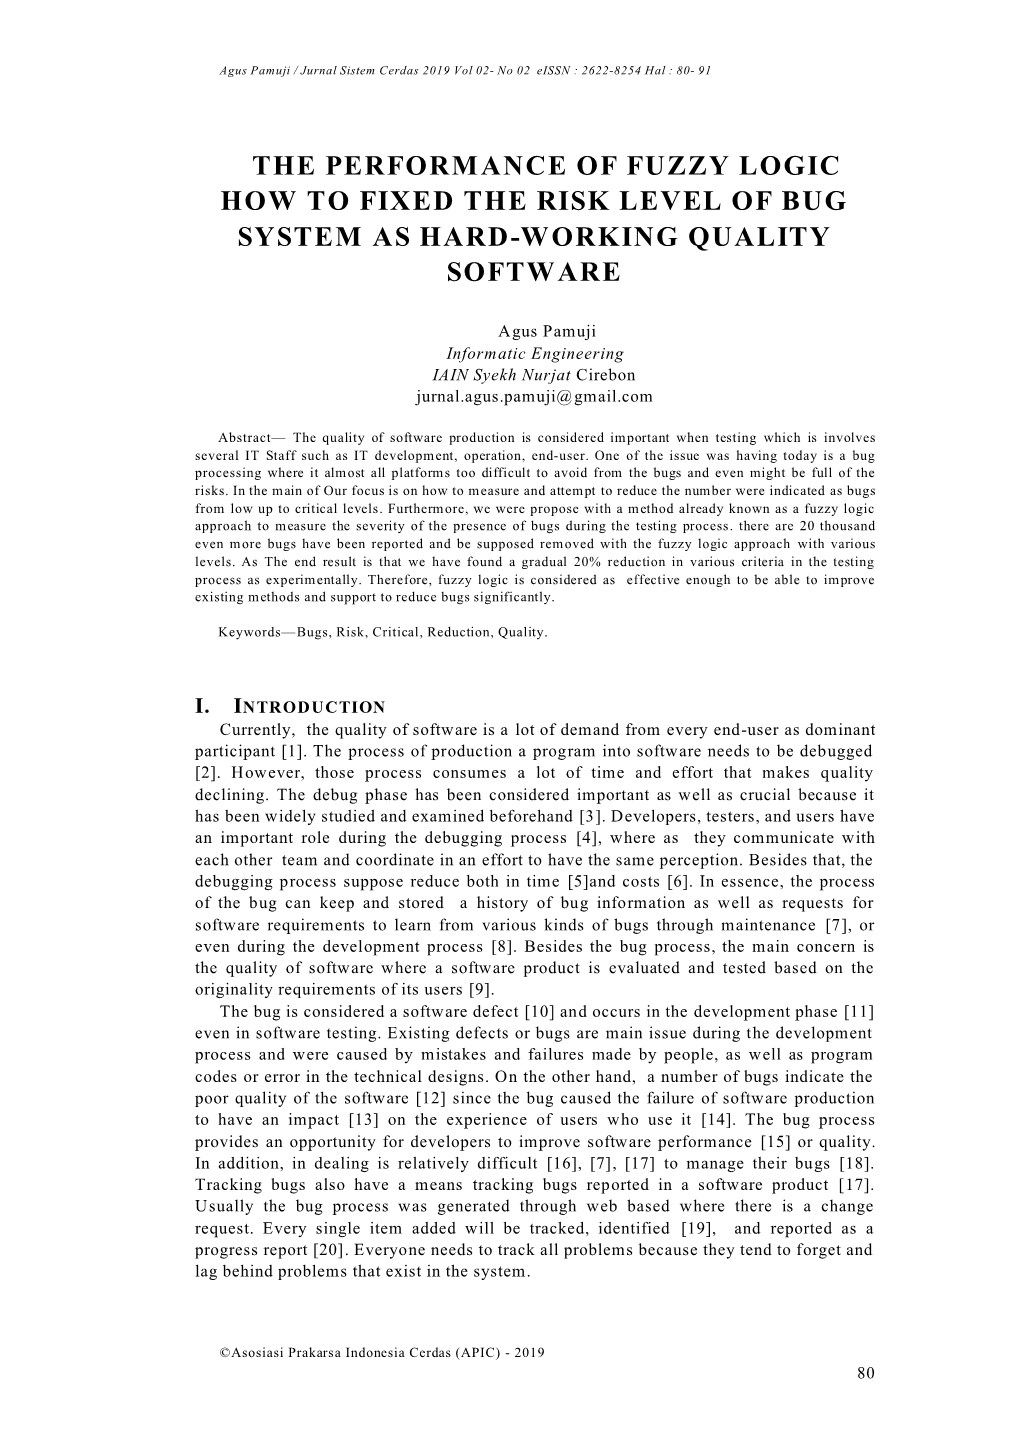 The Performance of Fuzzy Logic How to Fixed the Risk Level of Bug System As Hard-Working Quality Software